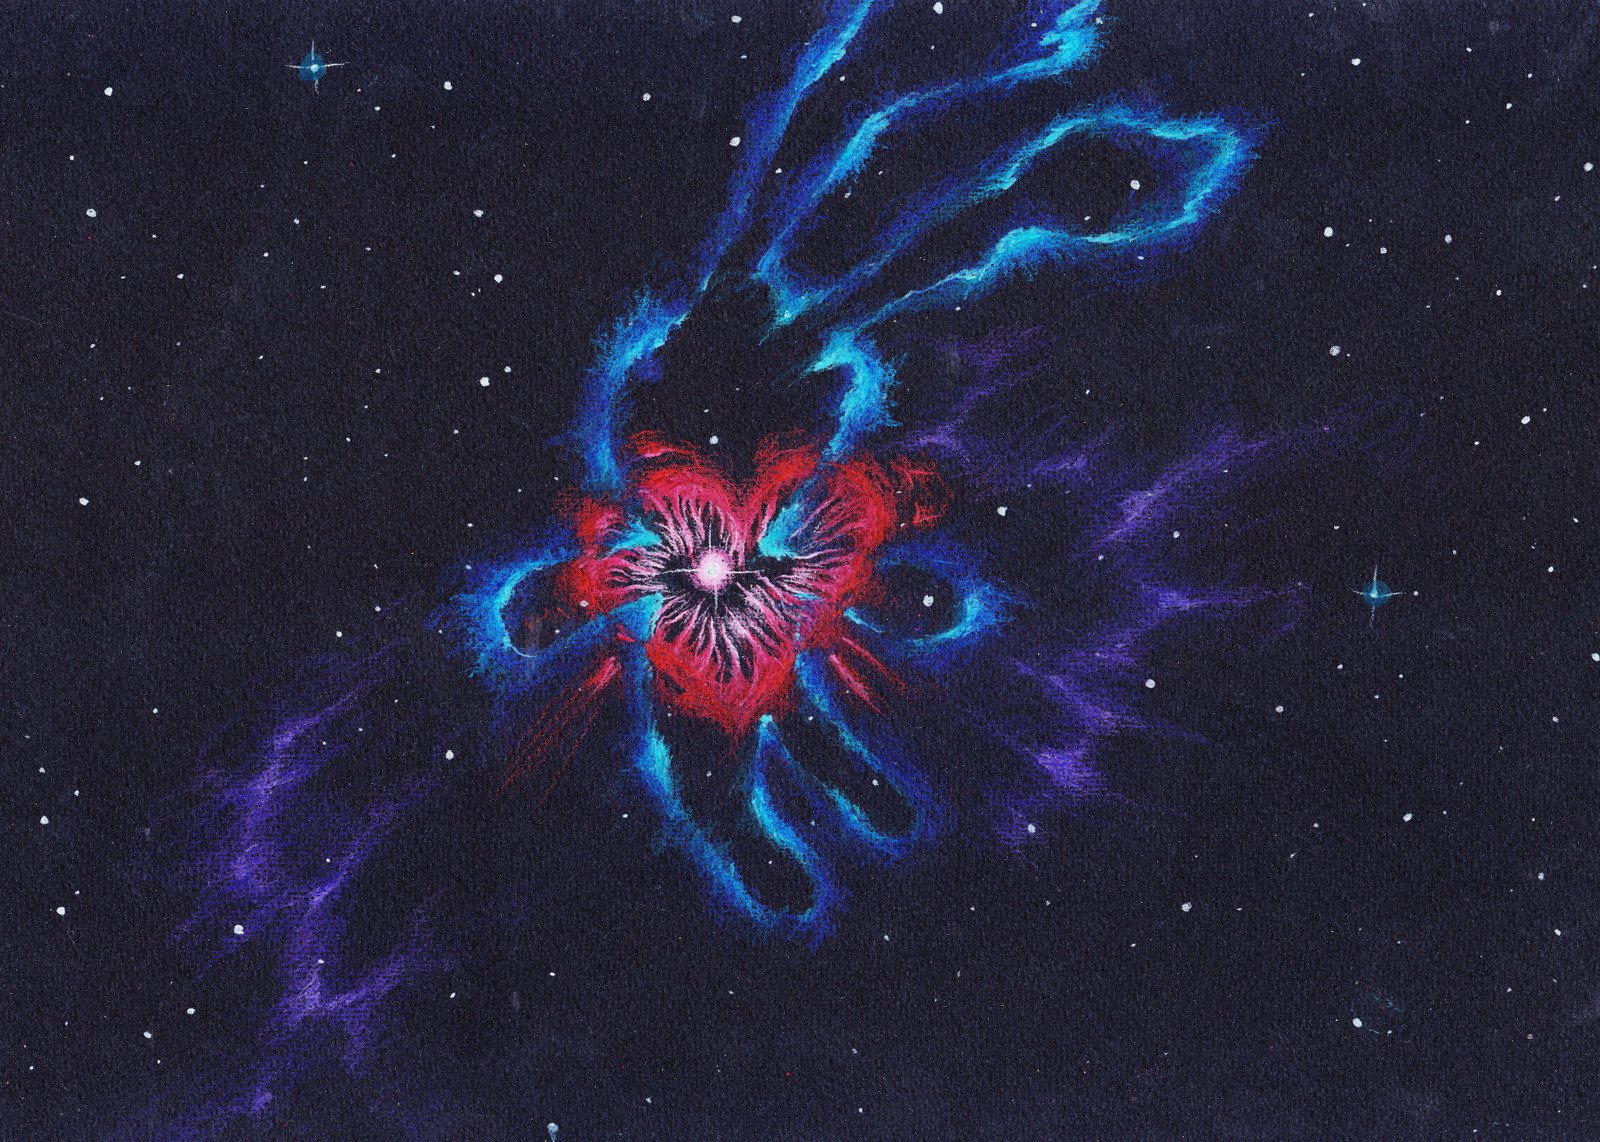 Rostan TavasievLovestruck Hare CAPOS(PN) 0005. Project for a Planetary Nebula in the Hydra Constellation, 2020Colored pencil on paperCourtesy of the artist